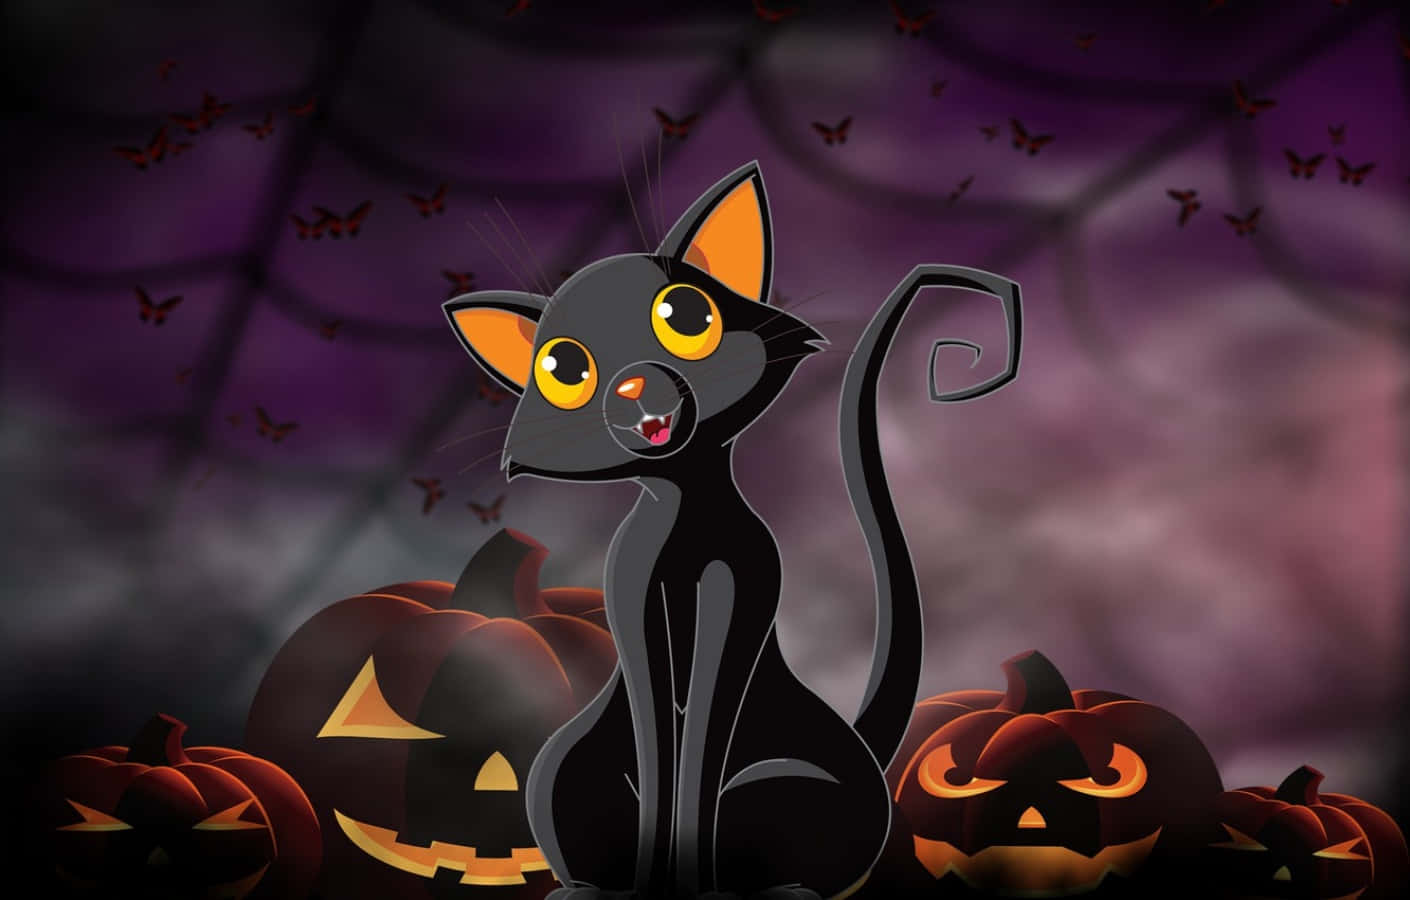 "You better watch out, she's one spooky kitty!"